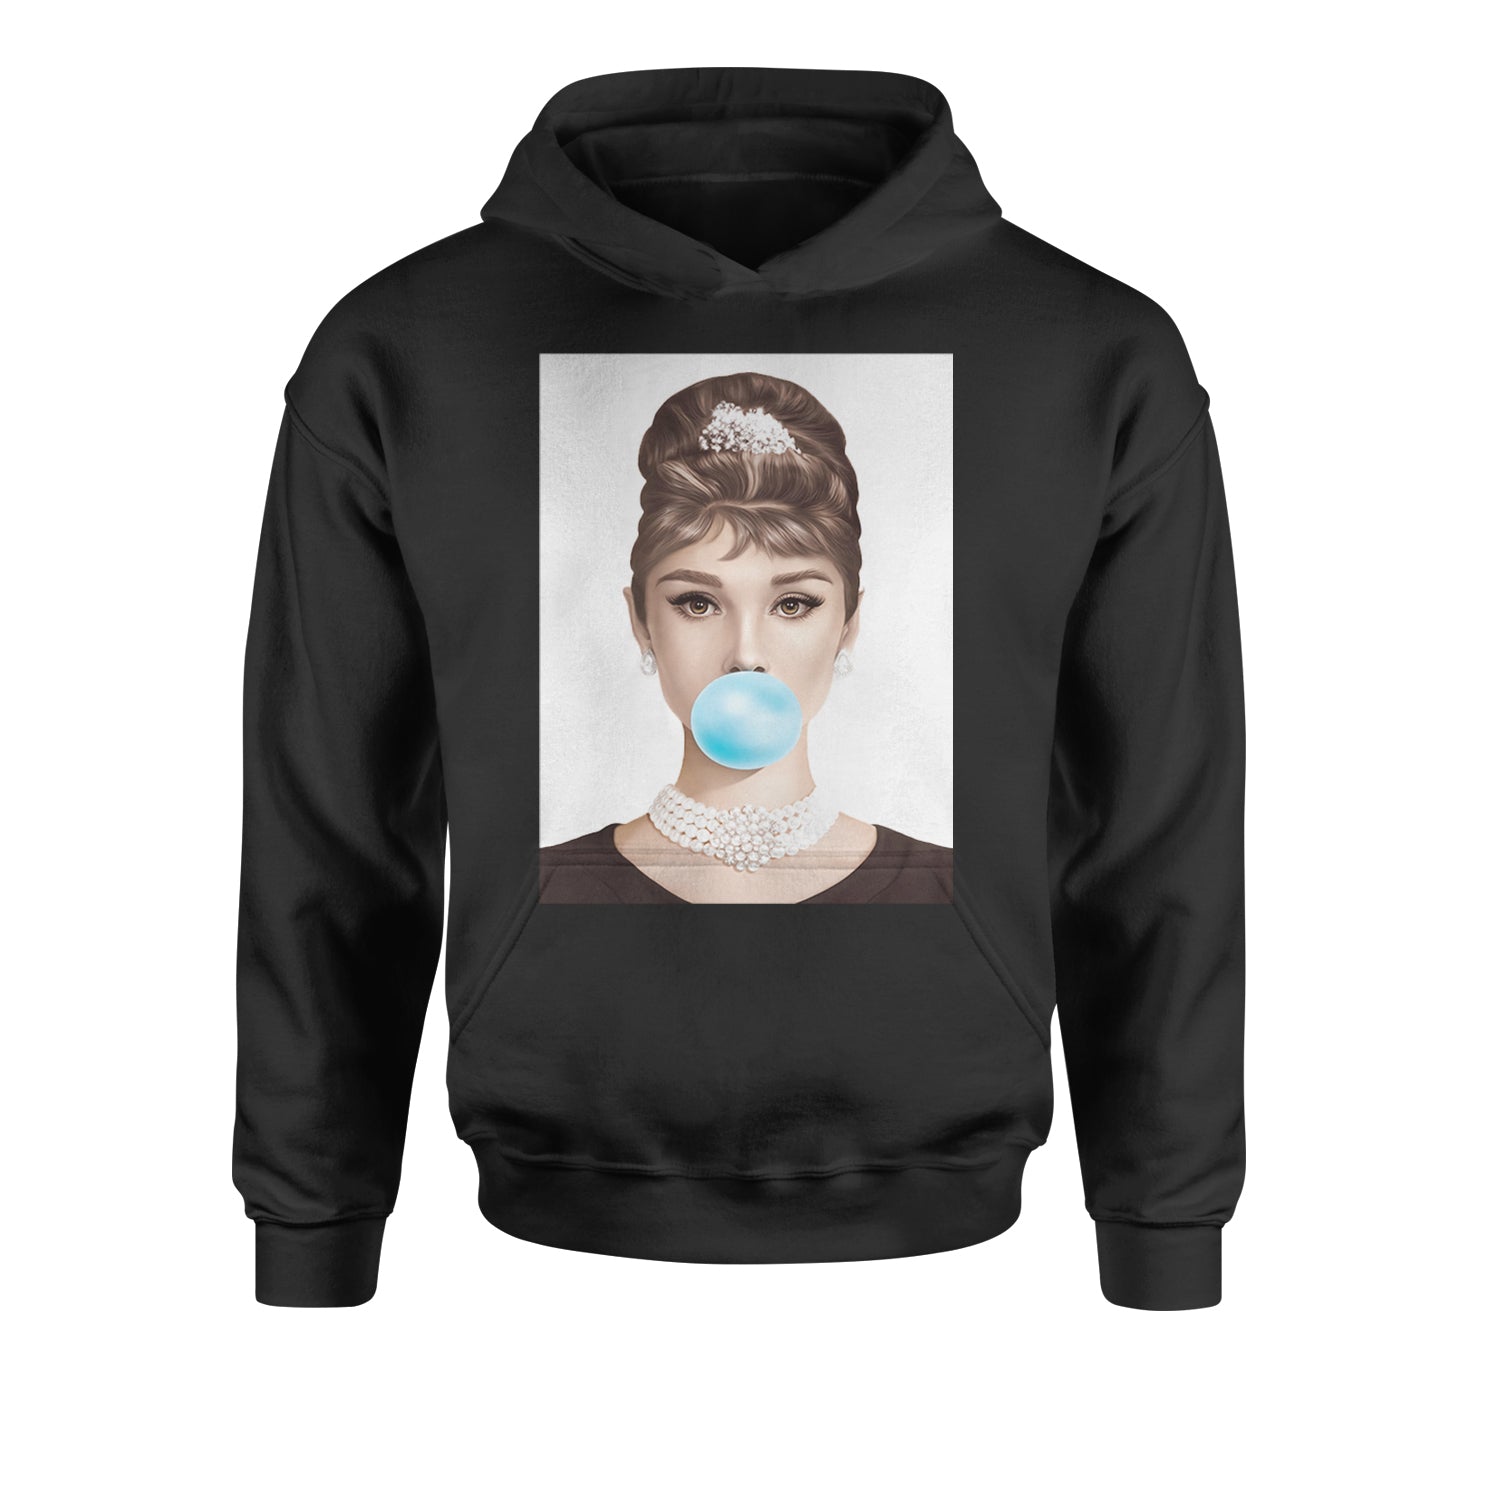 Audrey Hepburn Chewing Bubble Gum American Icon Youth-Sized Hoodie